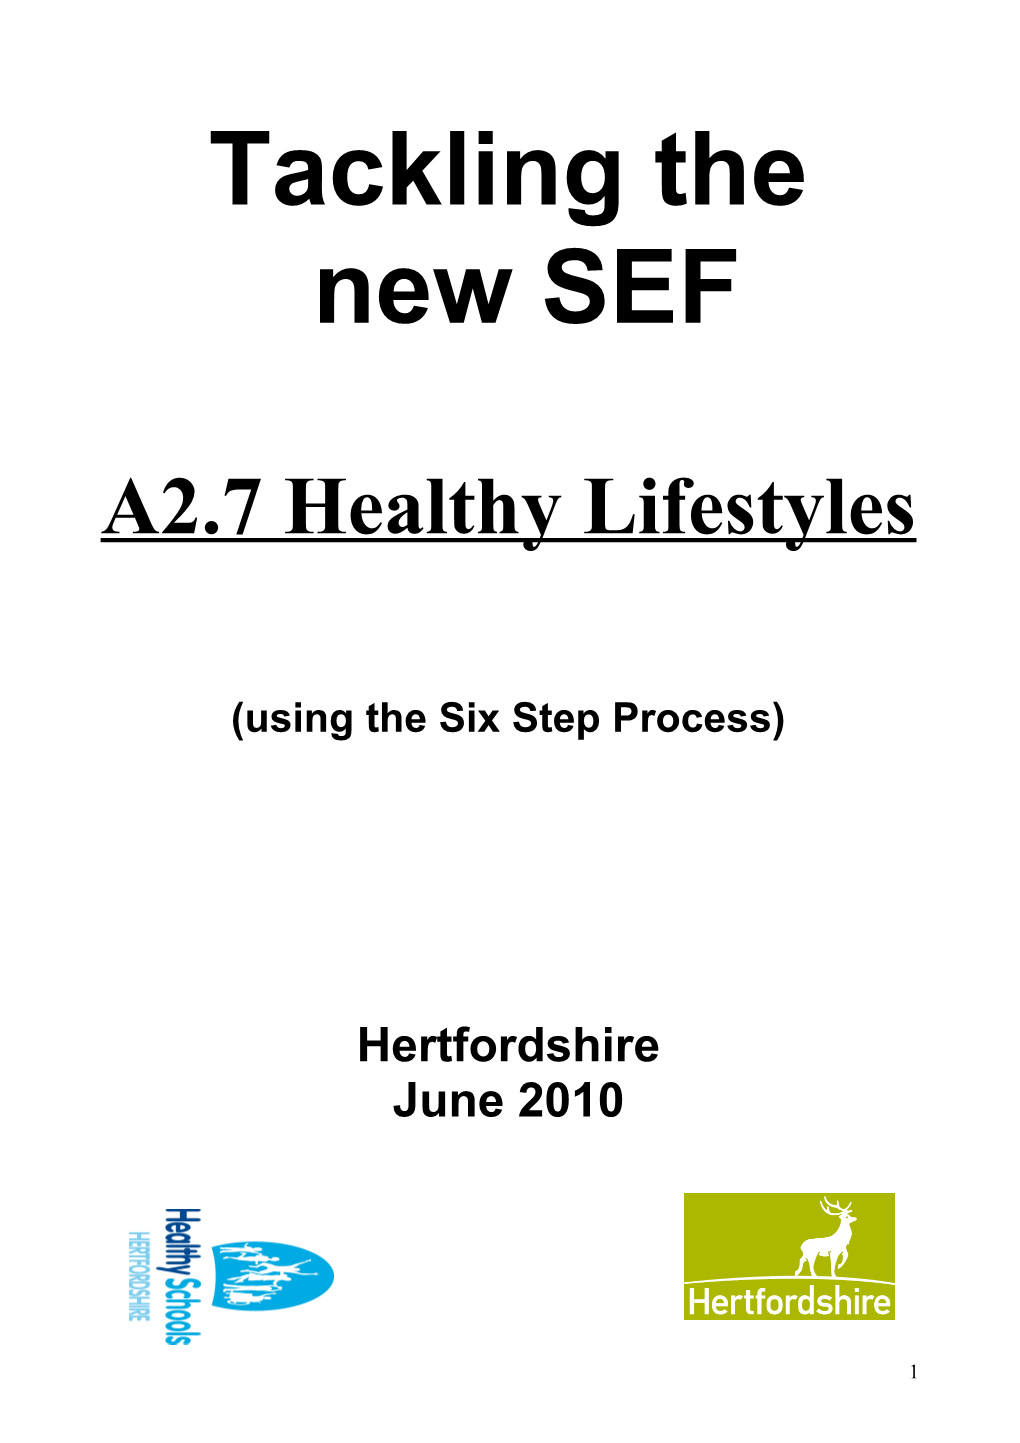 Tackling the New SEF - a 2.7 Healthy Lifestyles